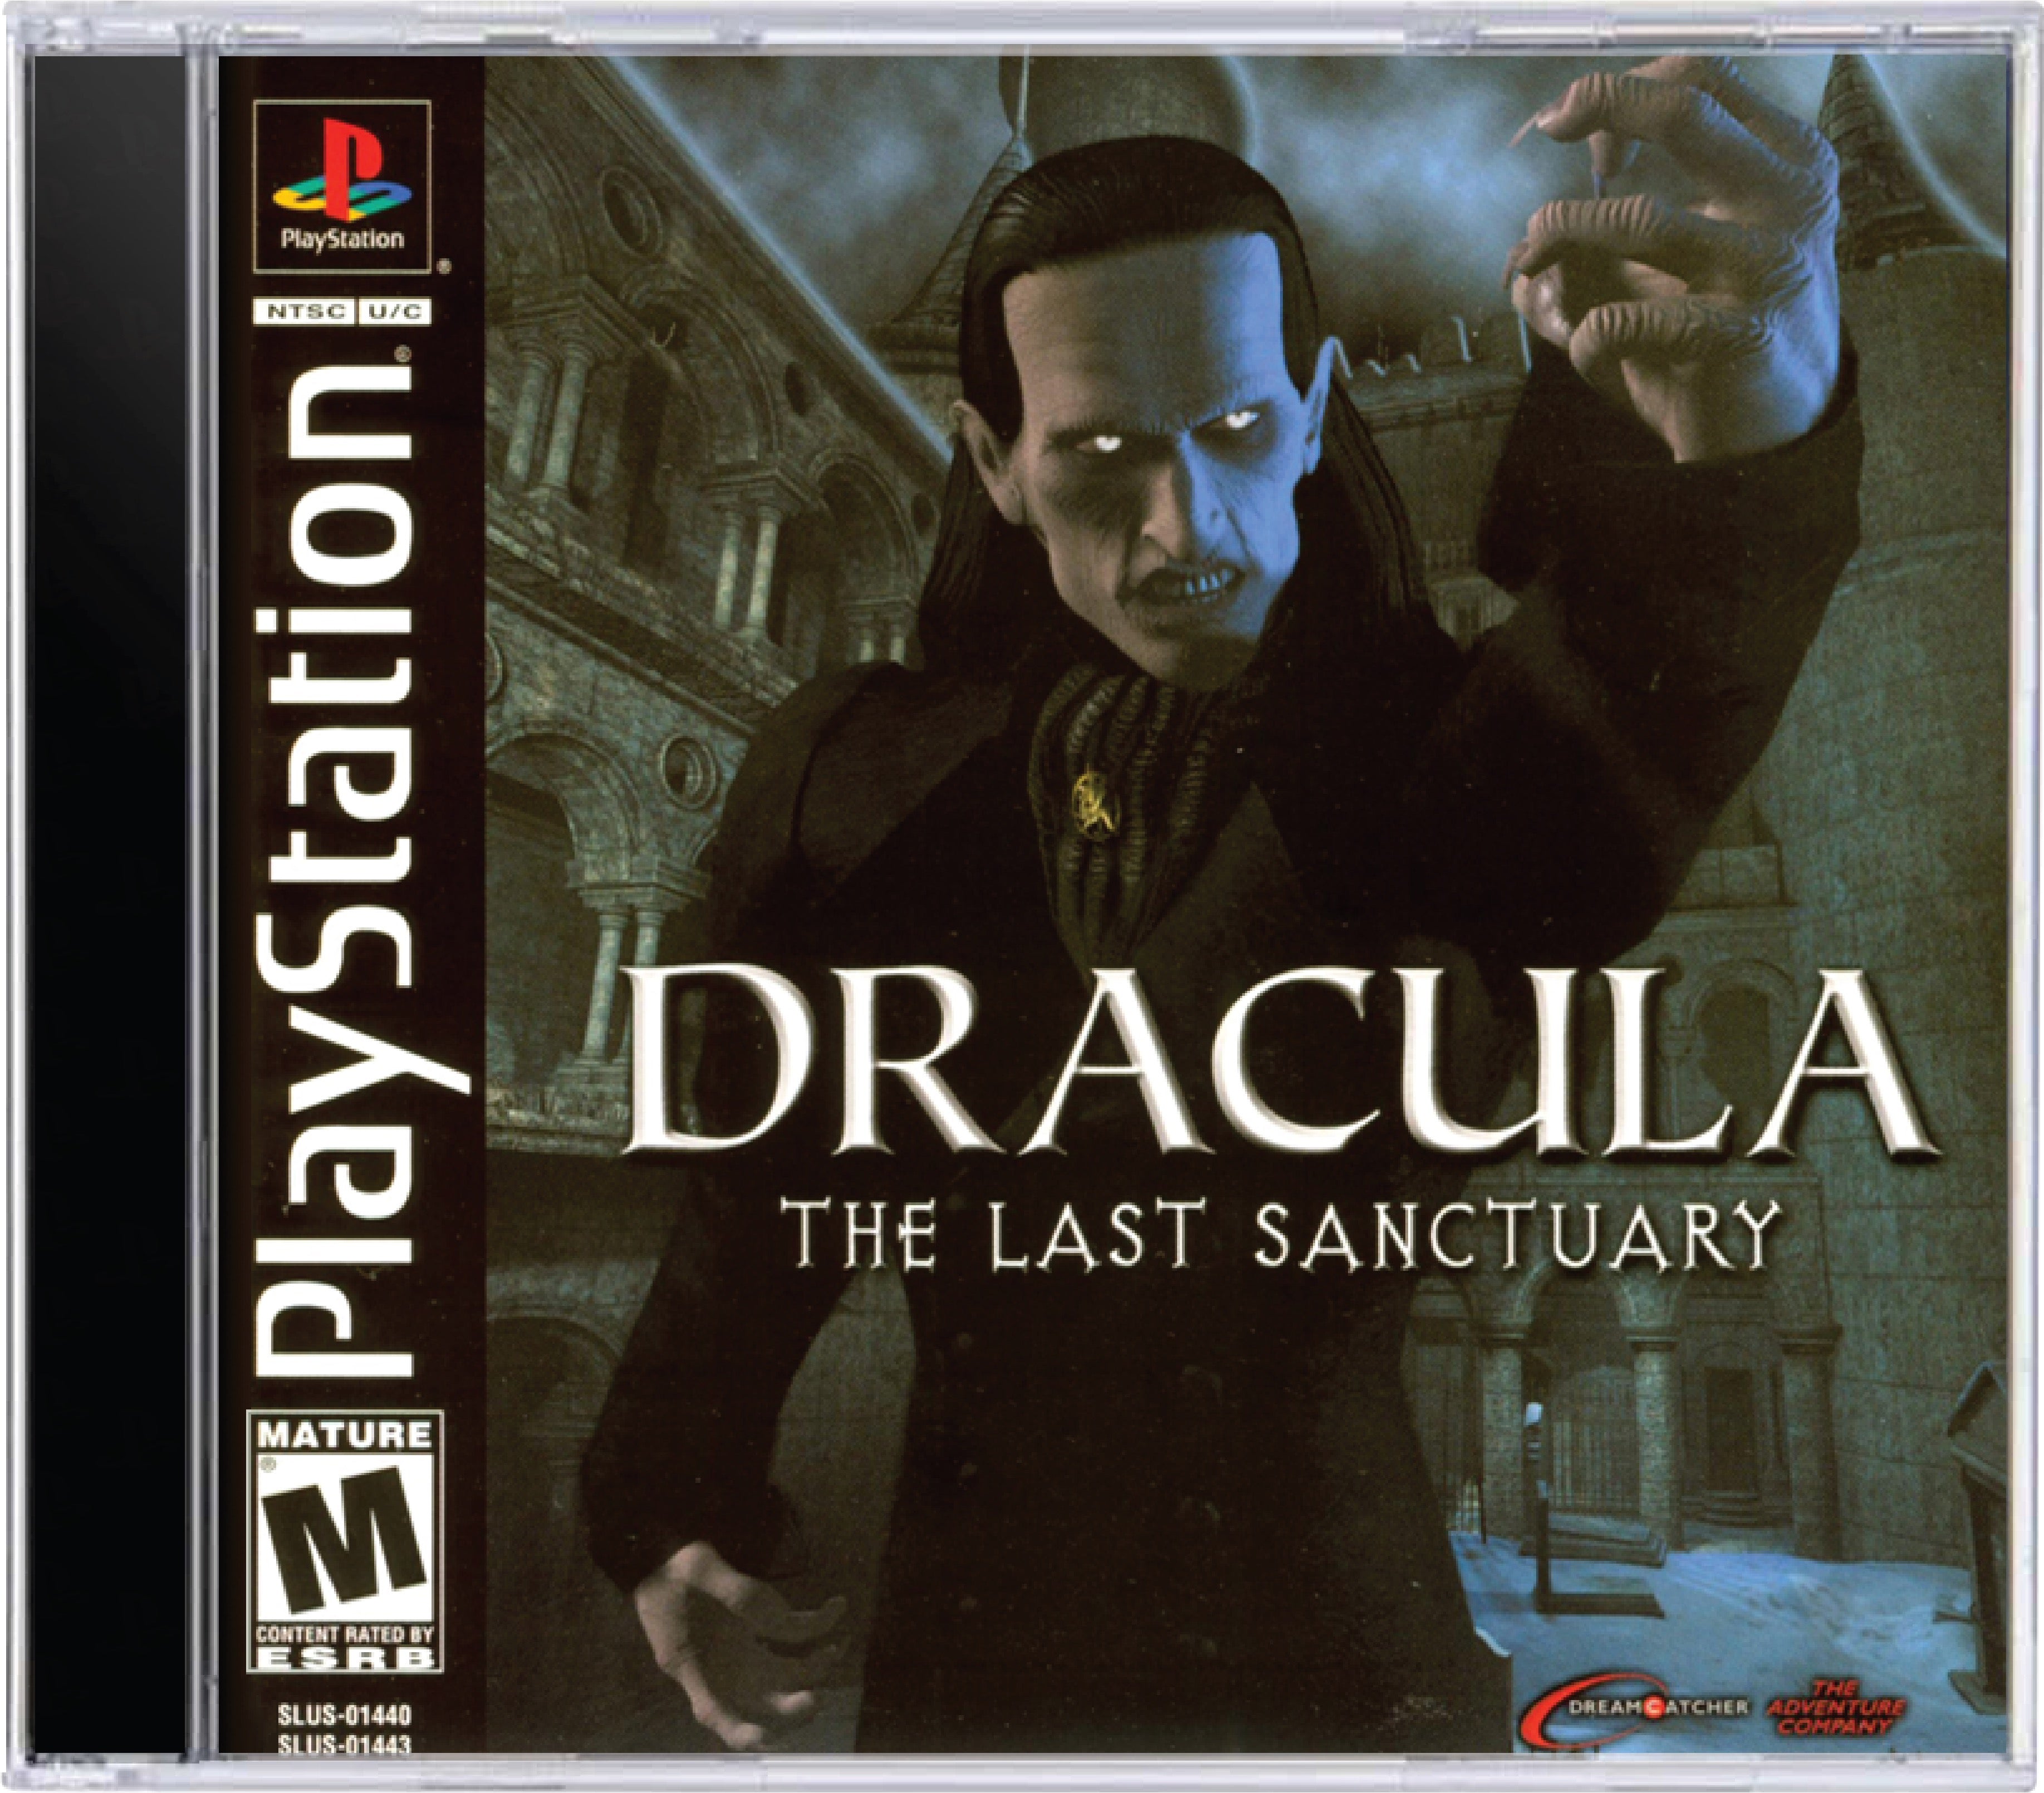 Dracula the Last Sanctuary Cover Art and Product Photo